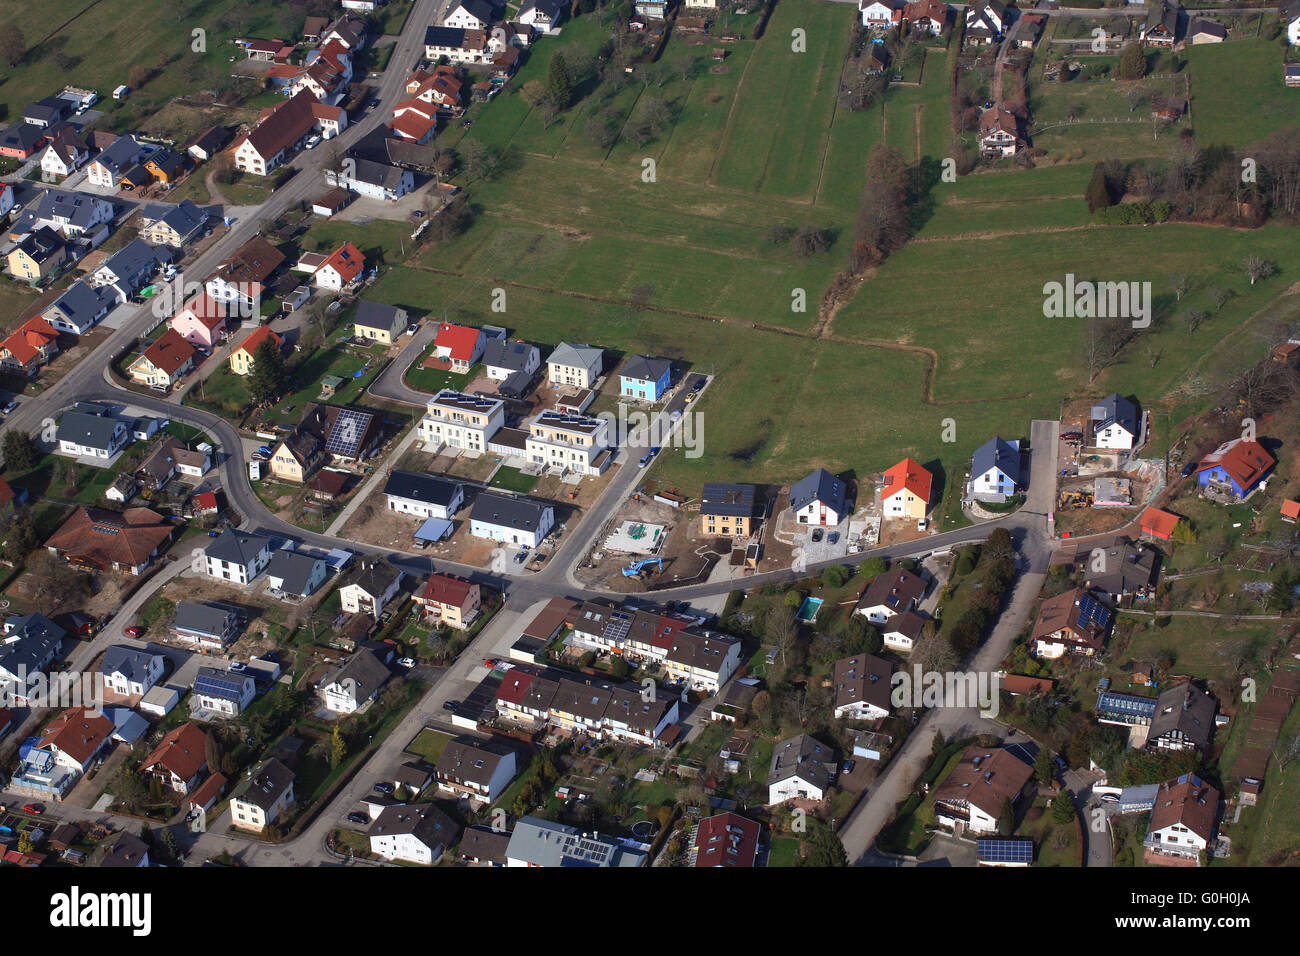 Typical peripheral development of a residential area Stock Photo